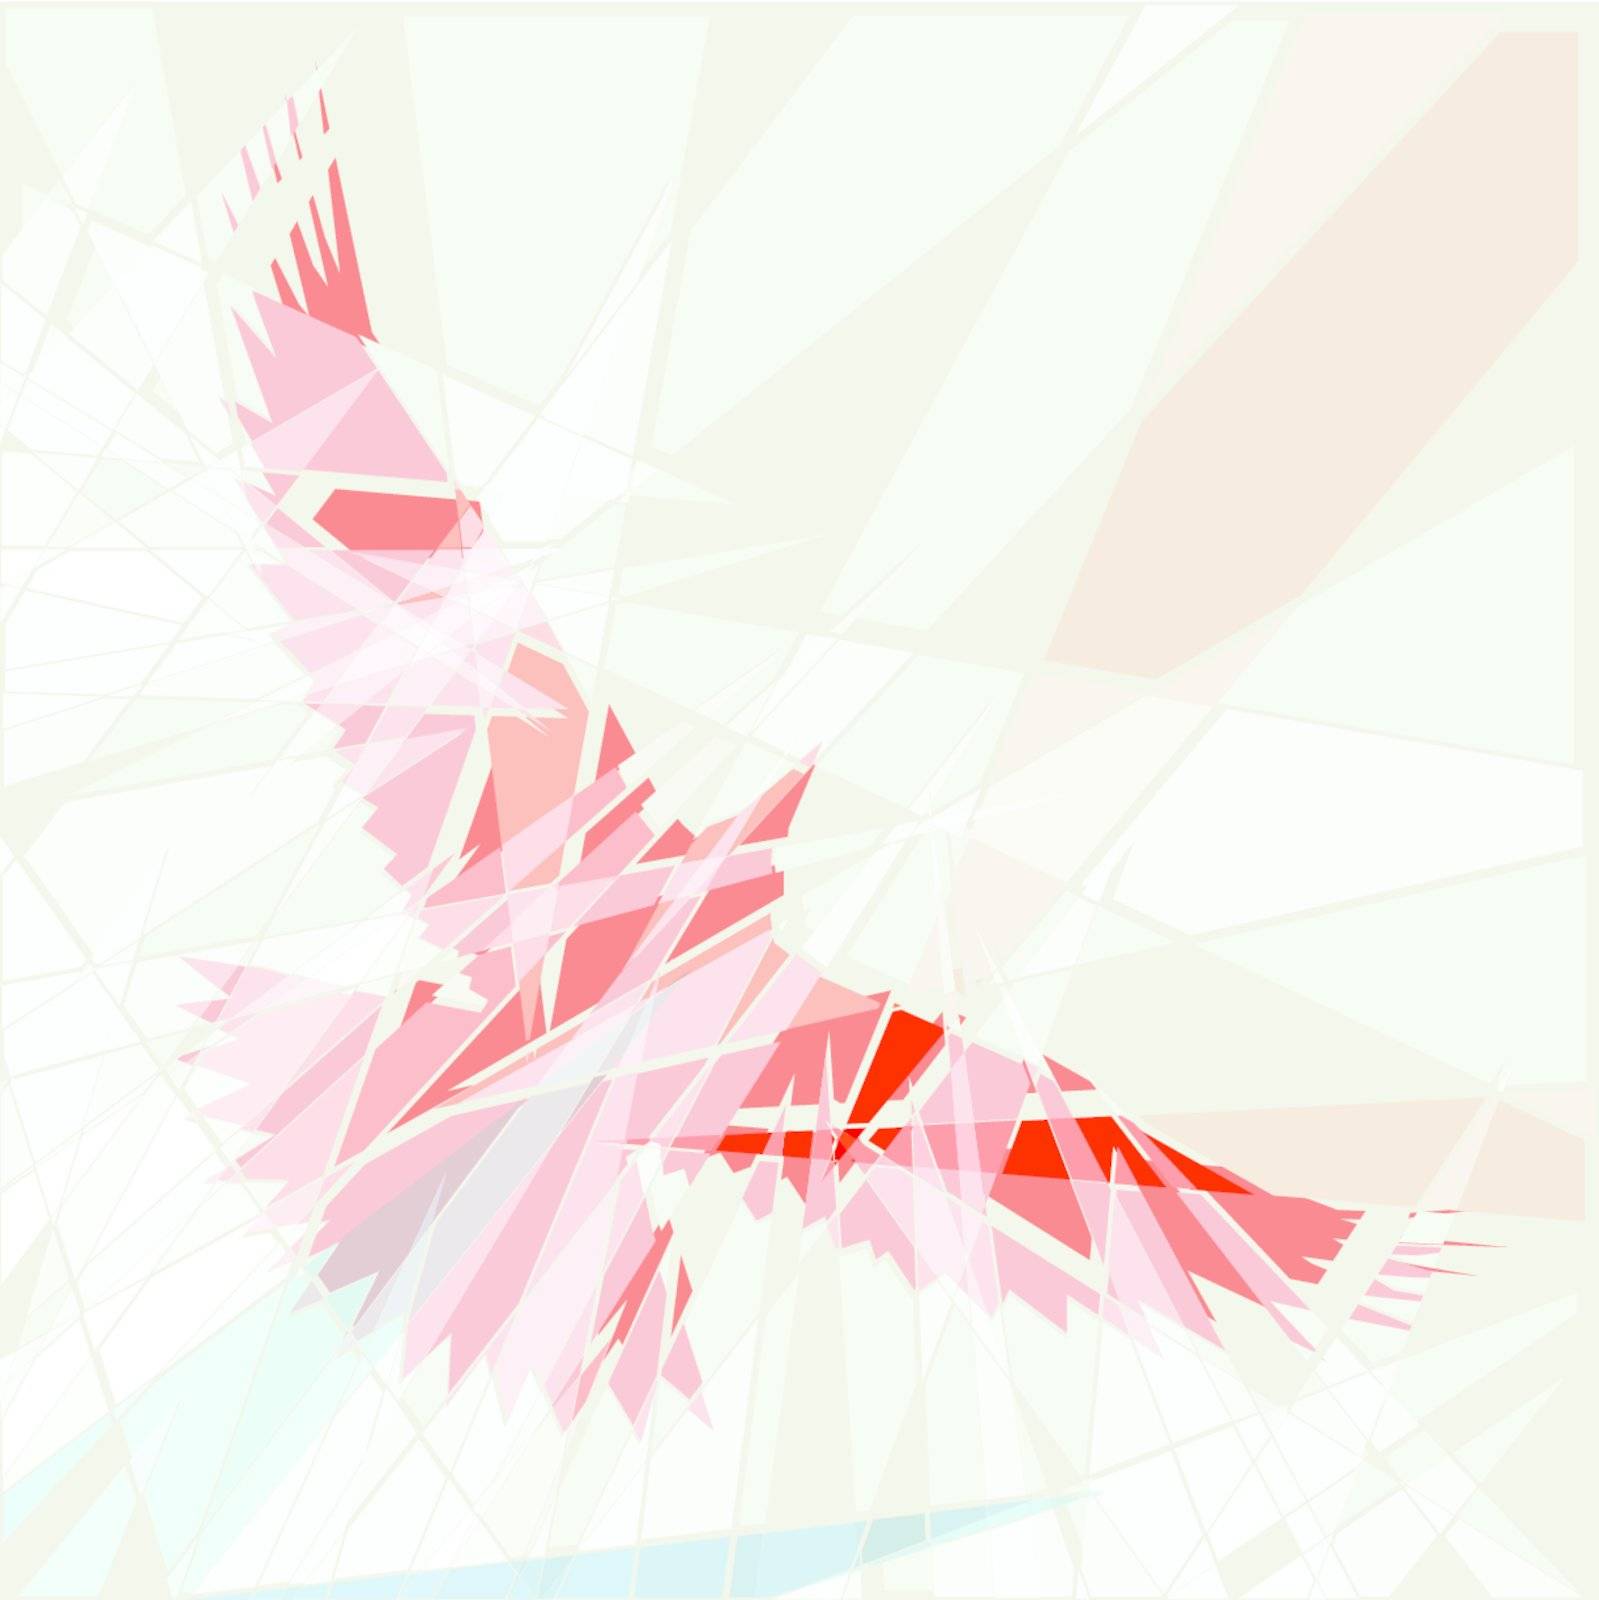 Editable vector illustration of a flying red bird as if seen through shattered glass